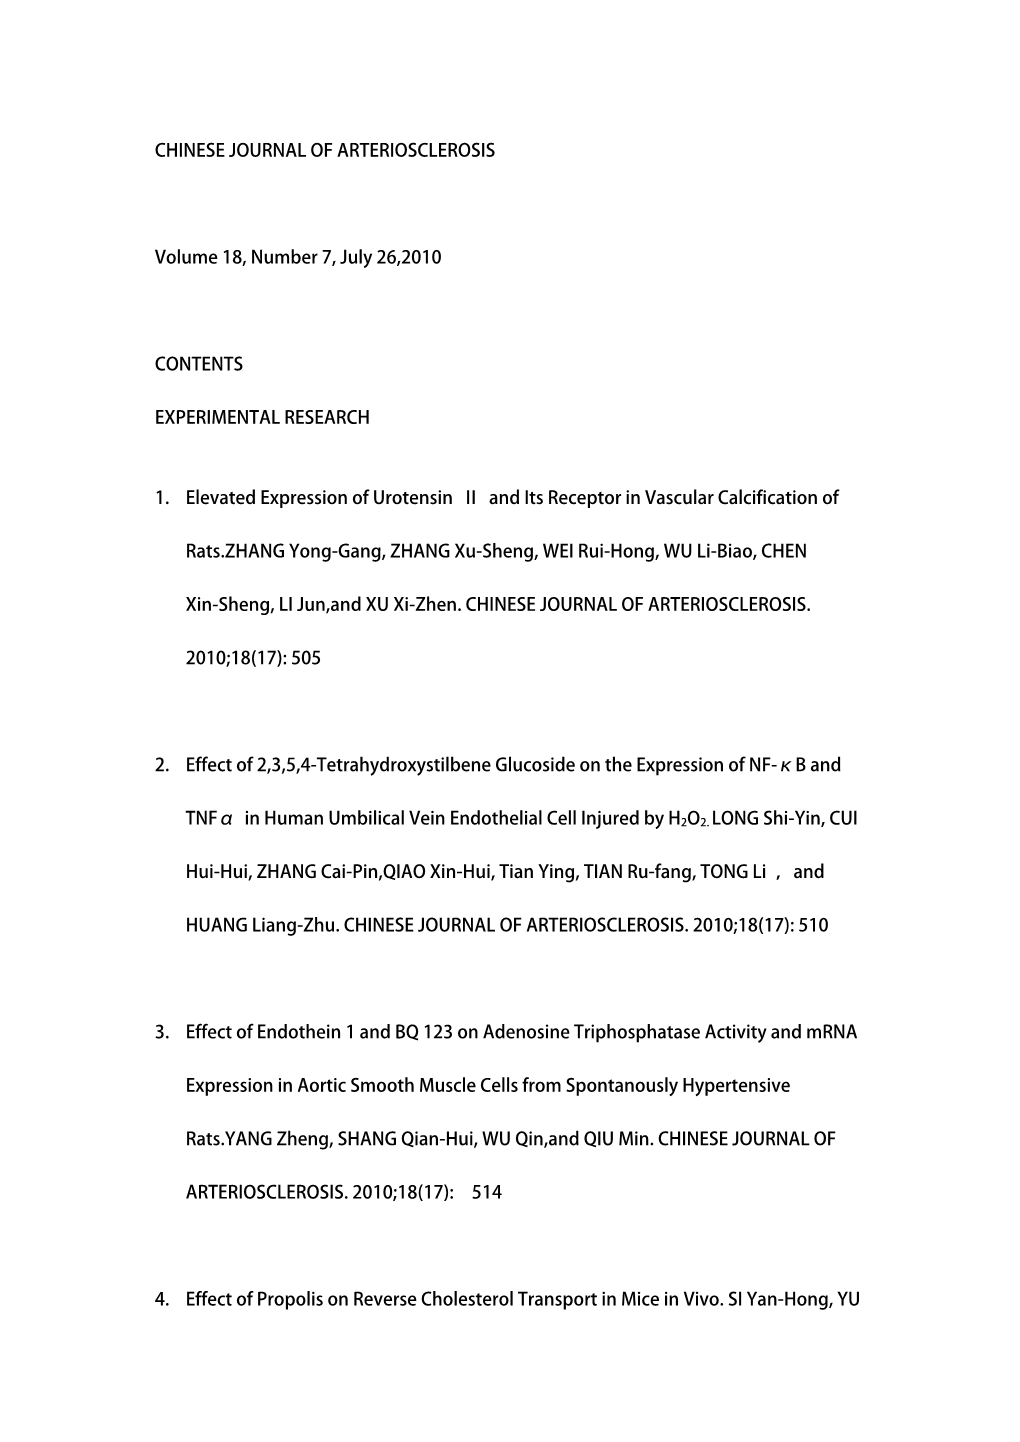 Chinese Journal of Atherosclerosis